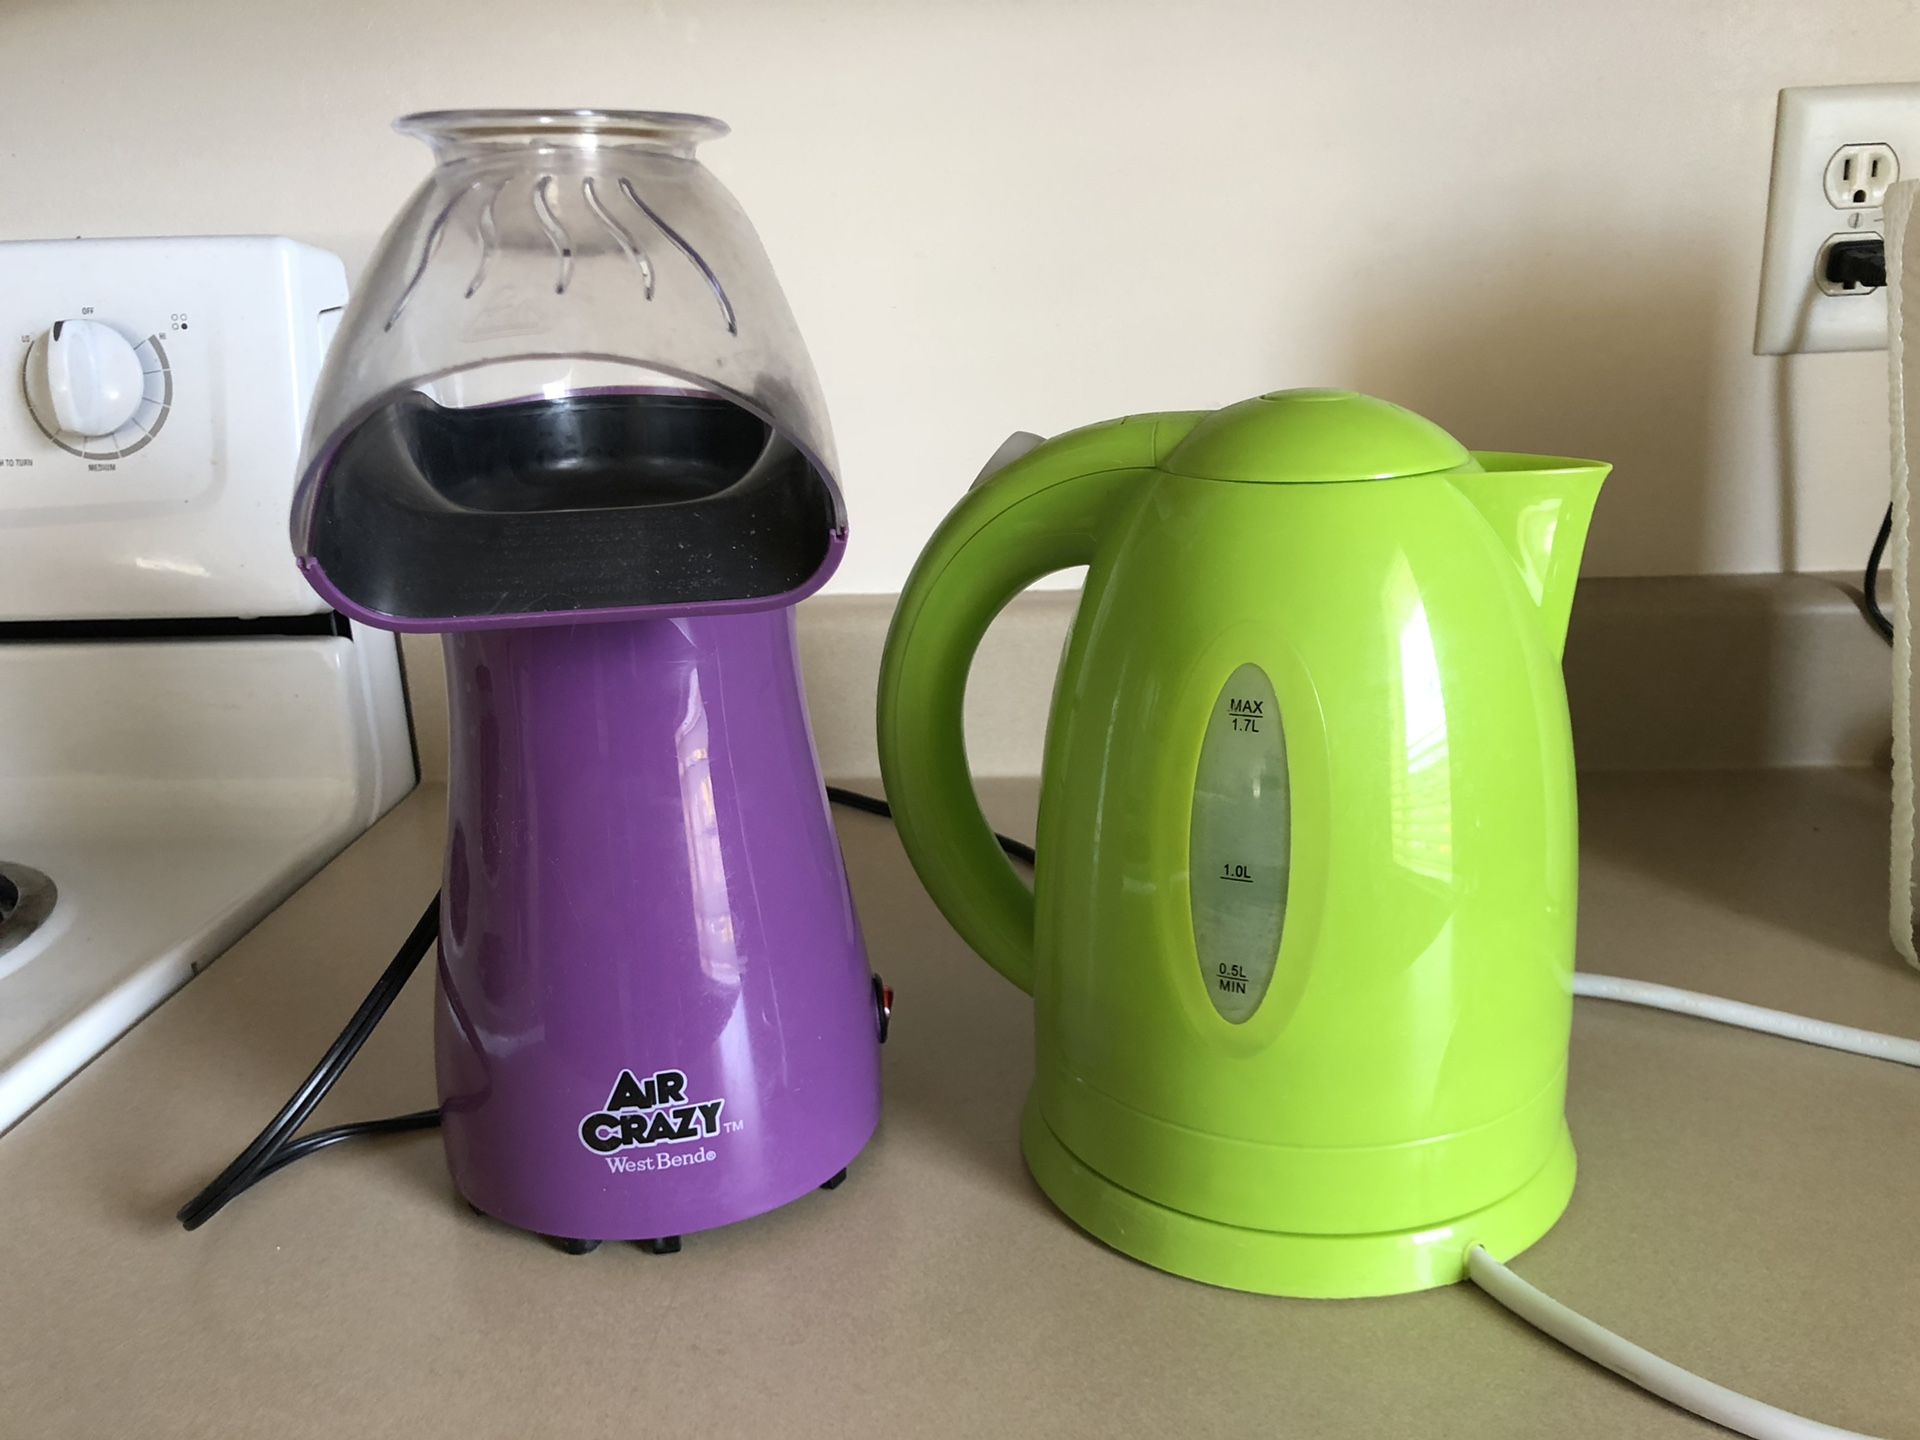 Popcorn air popper and water warmer for easy tea/coffee/hot coco!